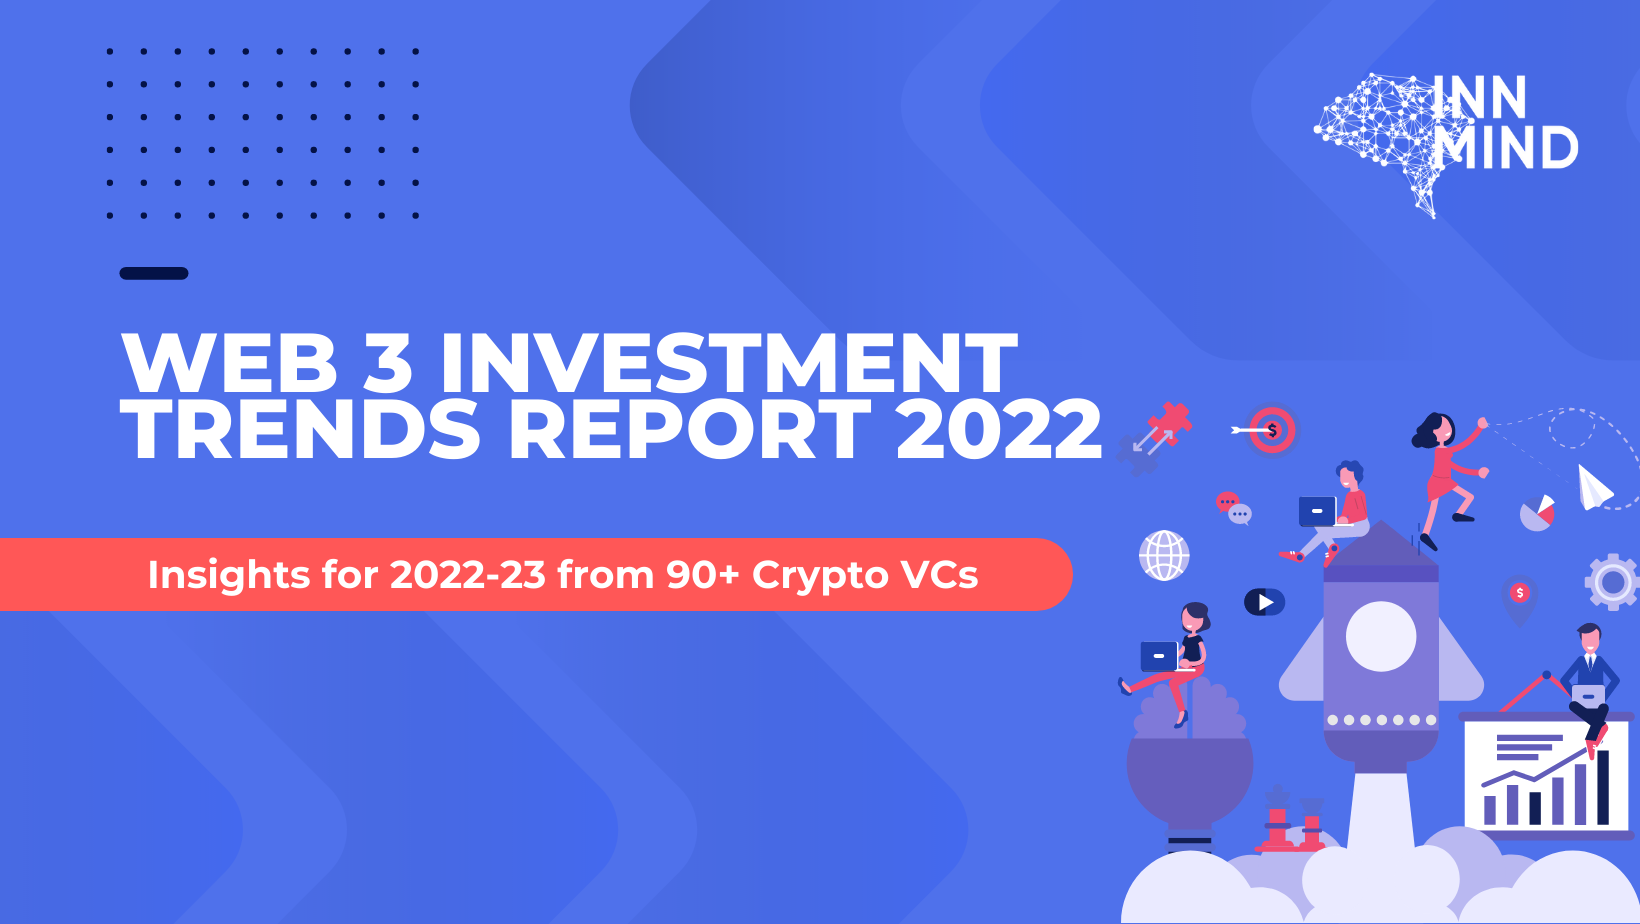 Web3 Investment Trends Report 2022